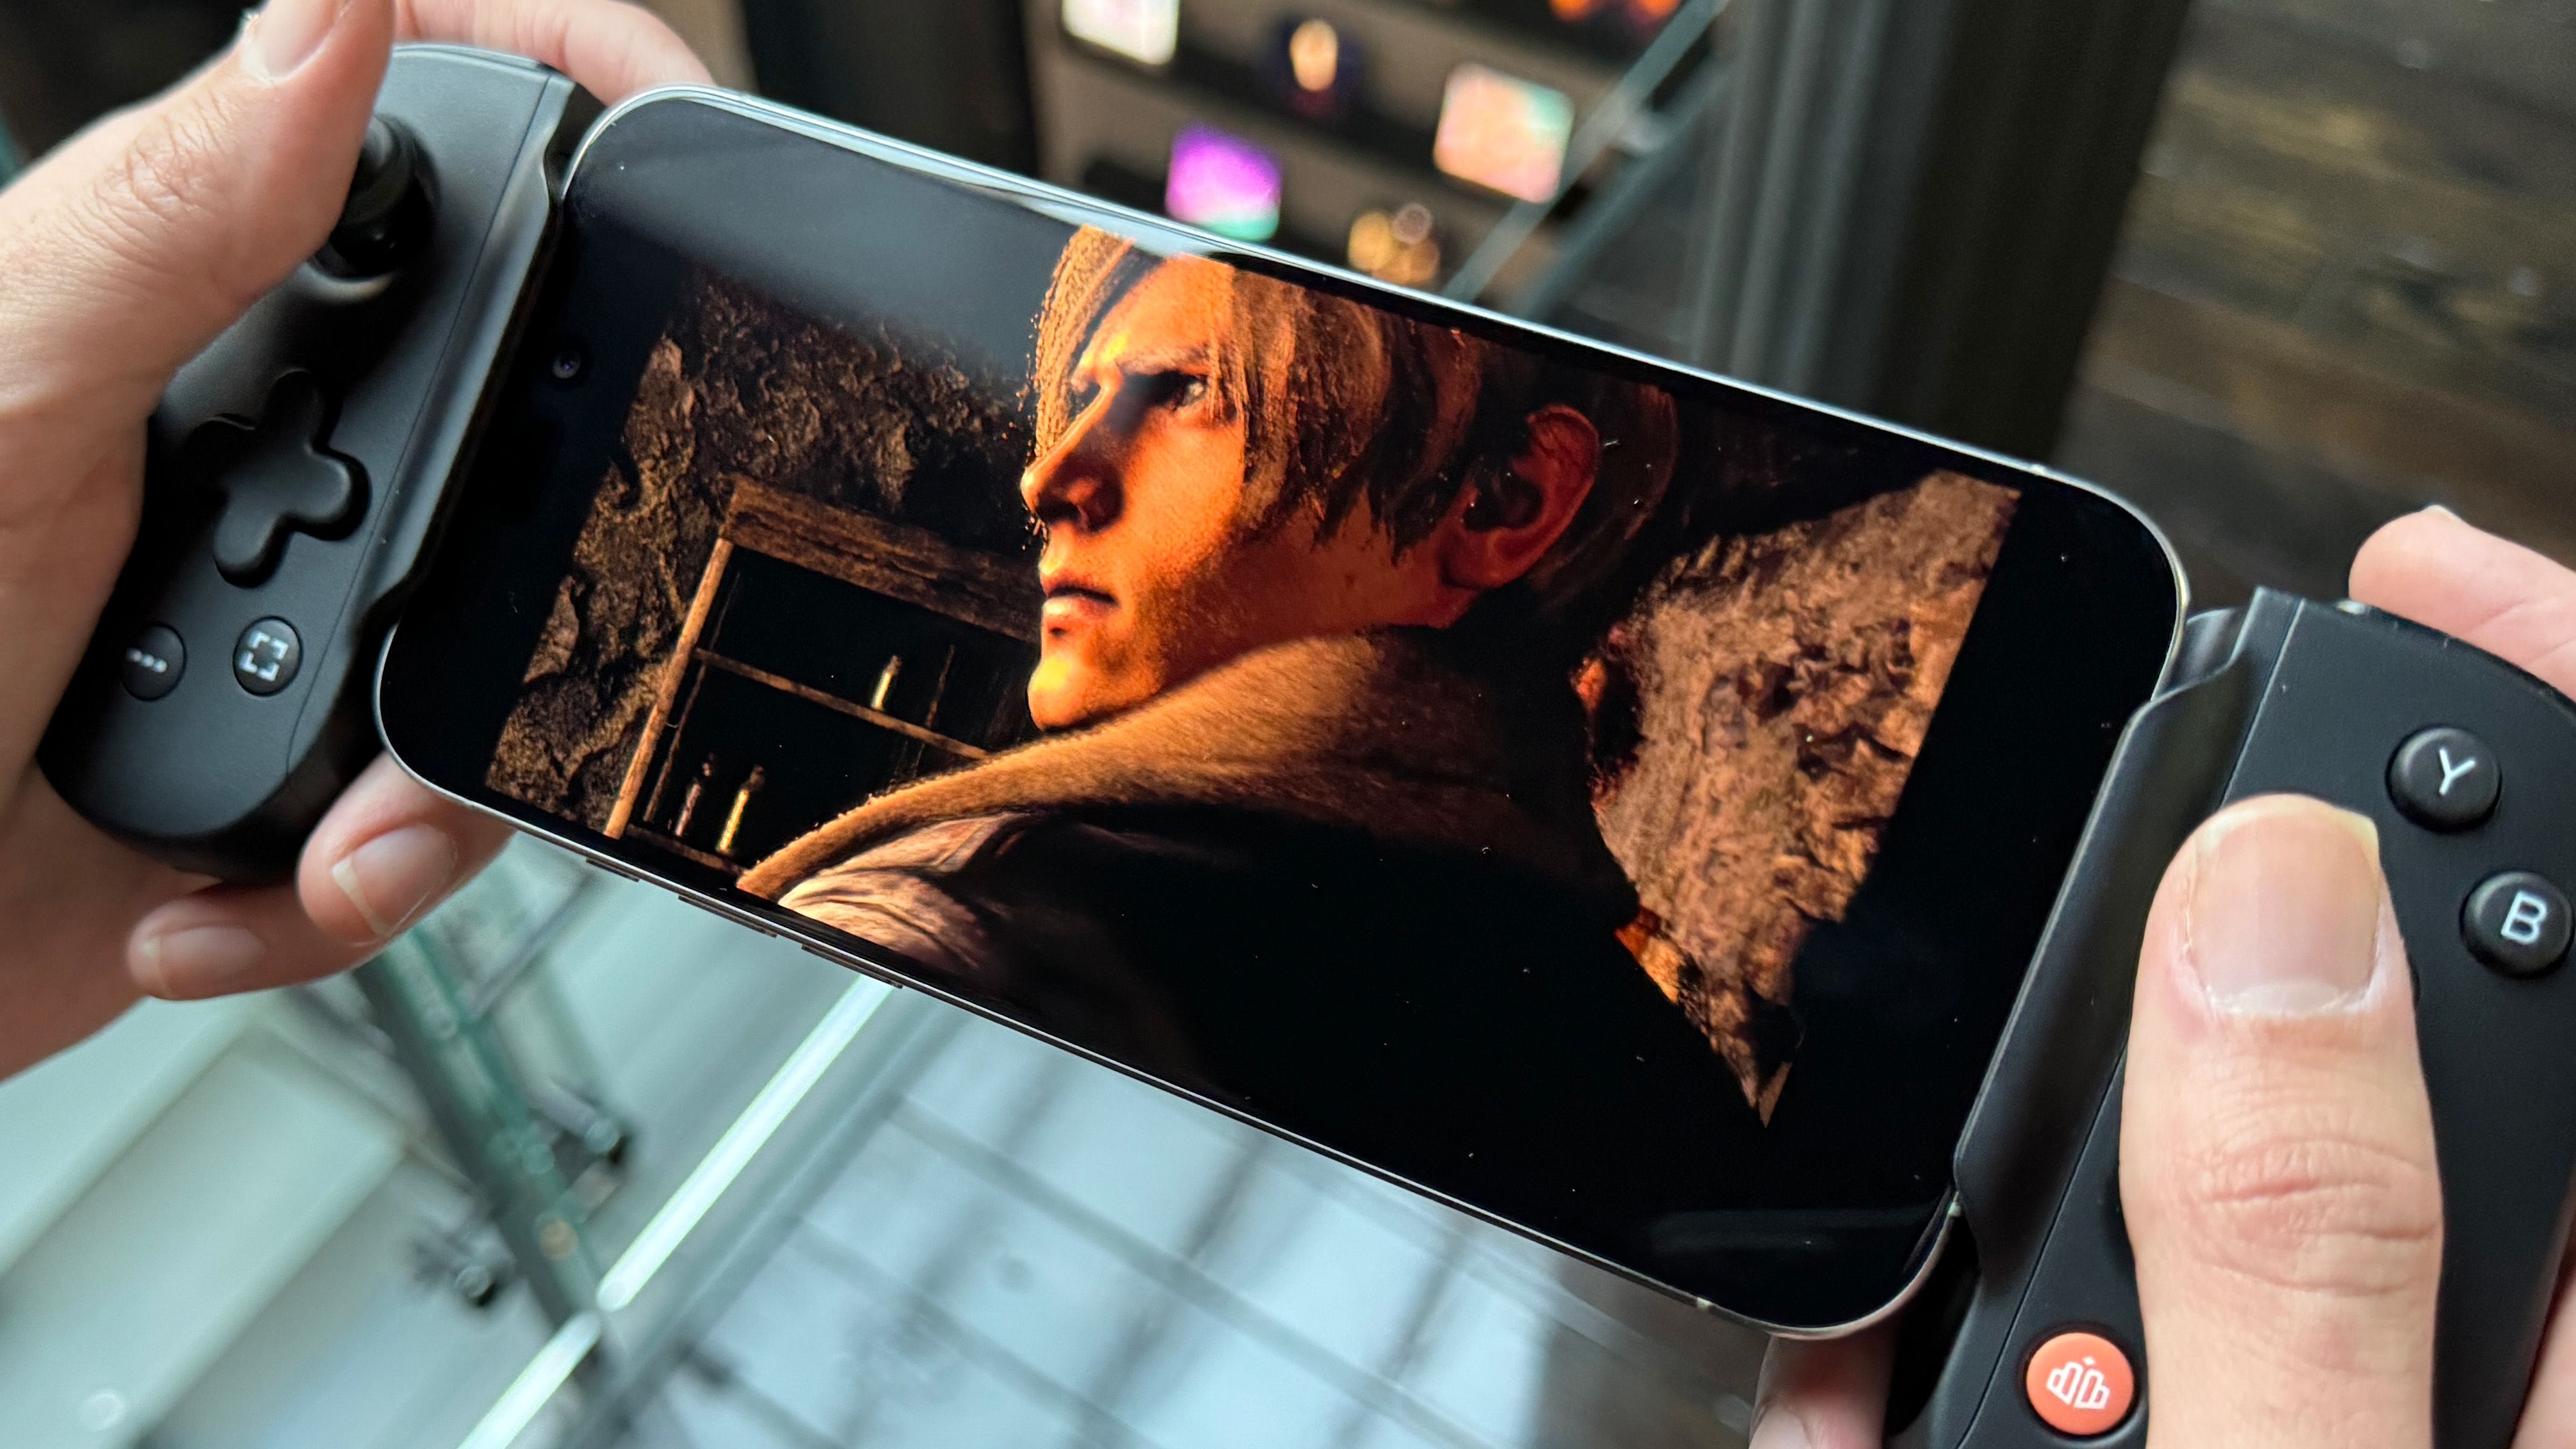 Resident Evil 4 and Resident Evil Village Coming to iPhone/iPad